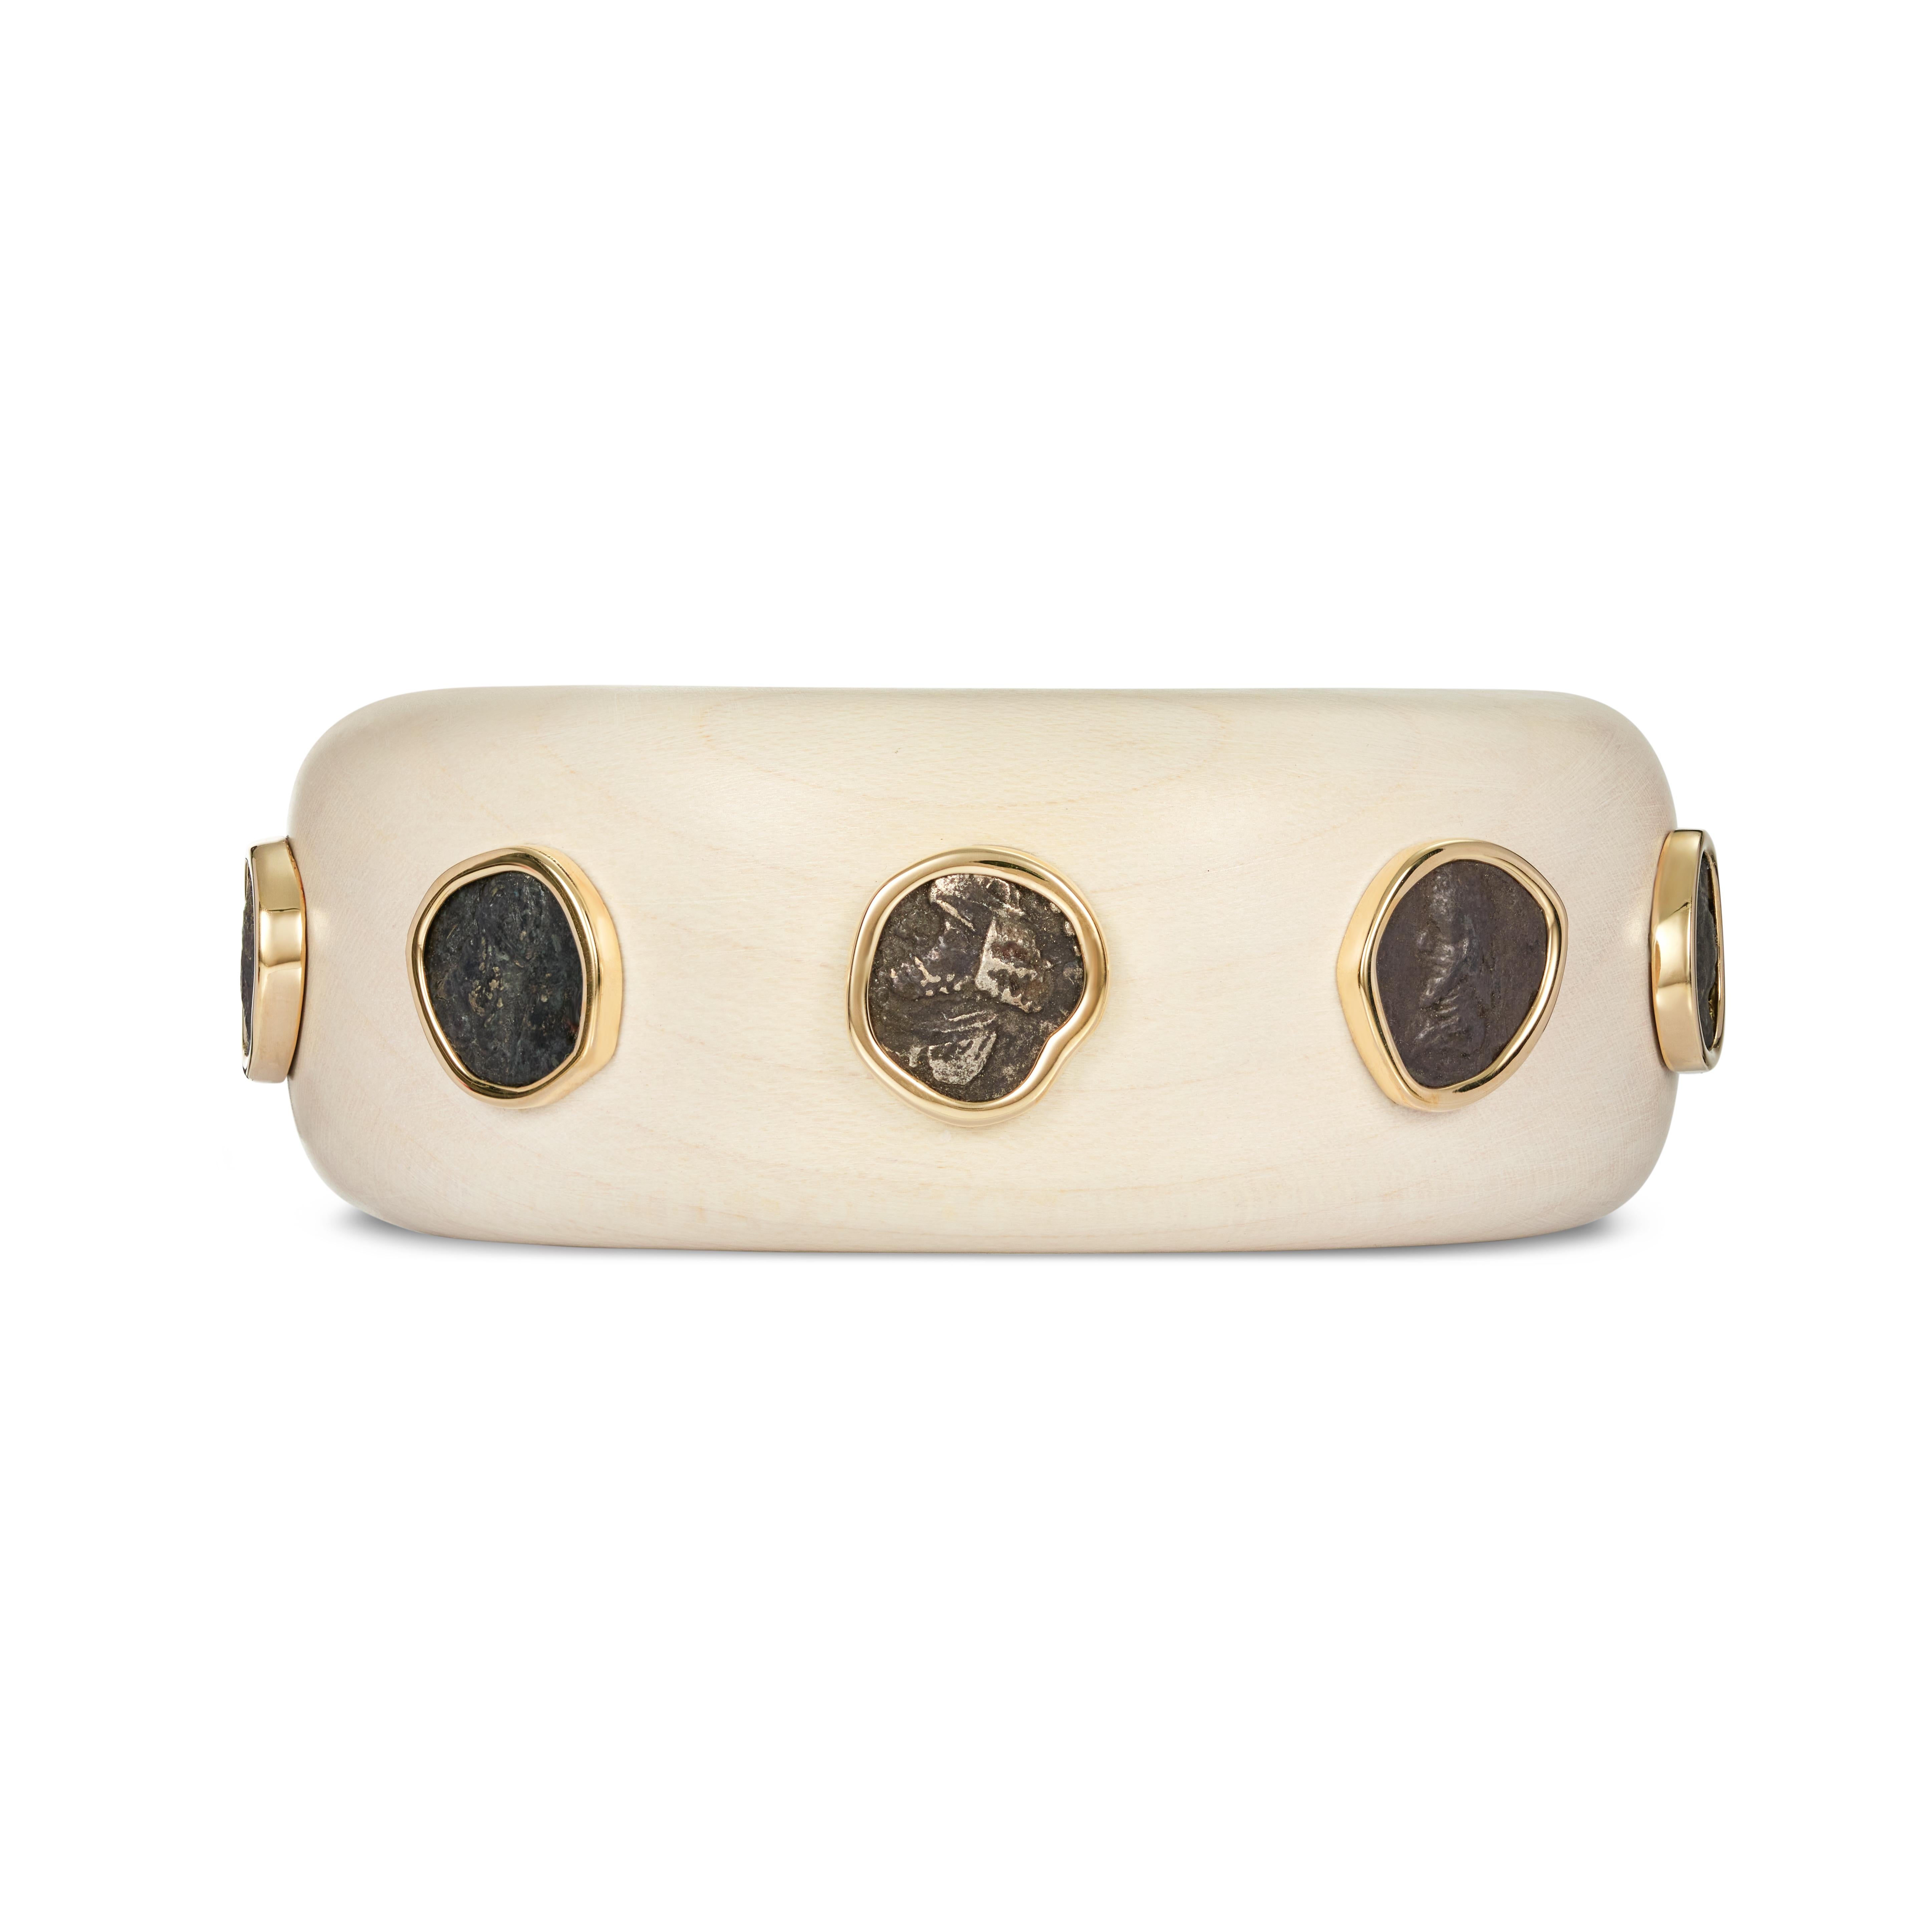 This DUBINI coin bracelet from the 'Empires' collection features an authentic hemidrachm coins of Kings of Persis circa 1st century B.C. set in 18kt yellow gold on maple wooden bracelet.   

* Each piece is provided with a certificate of